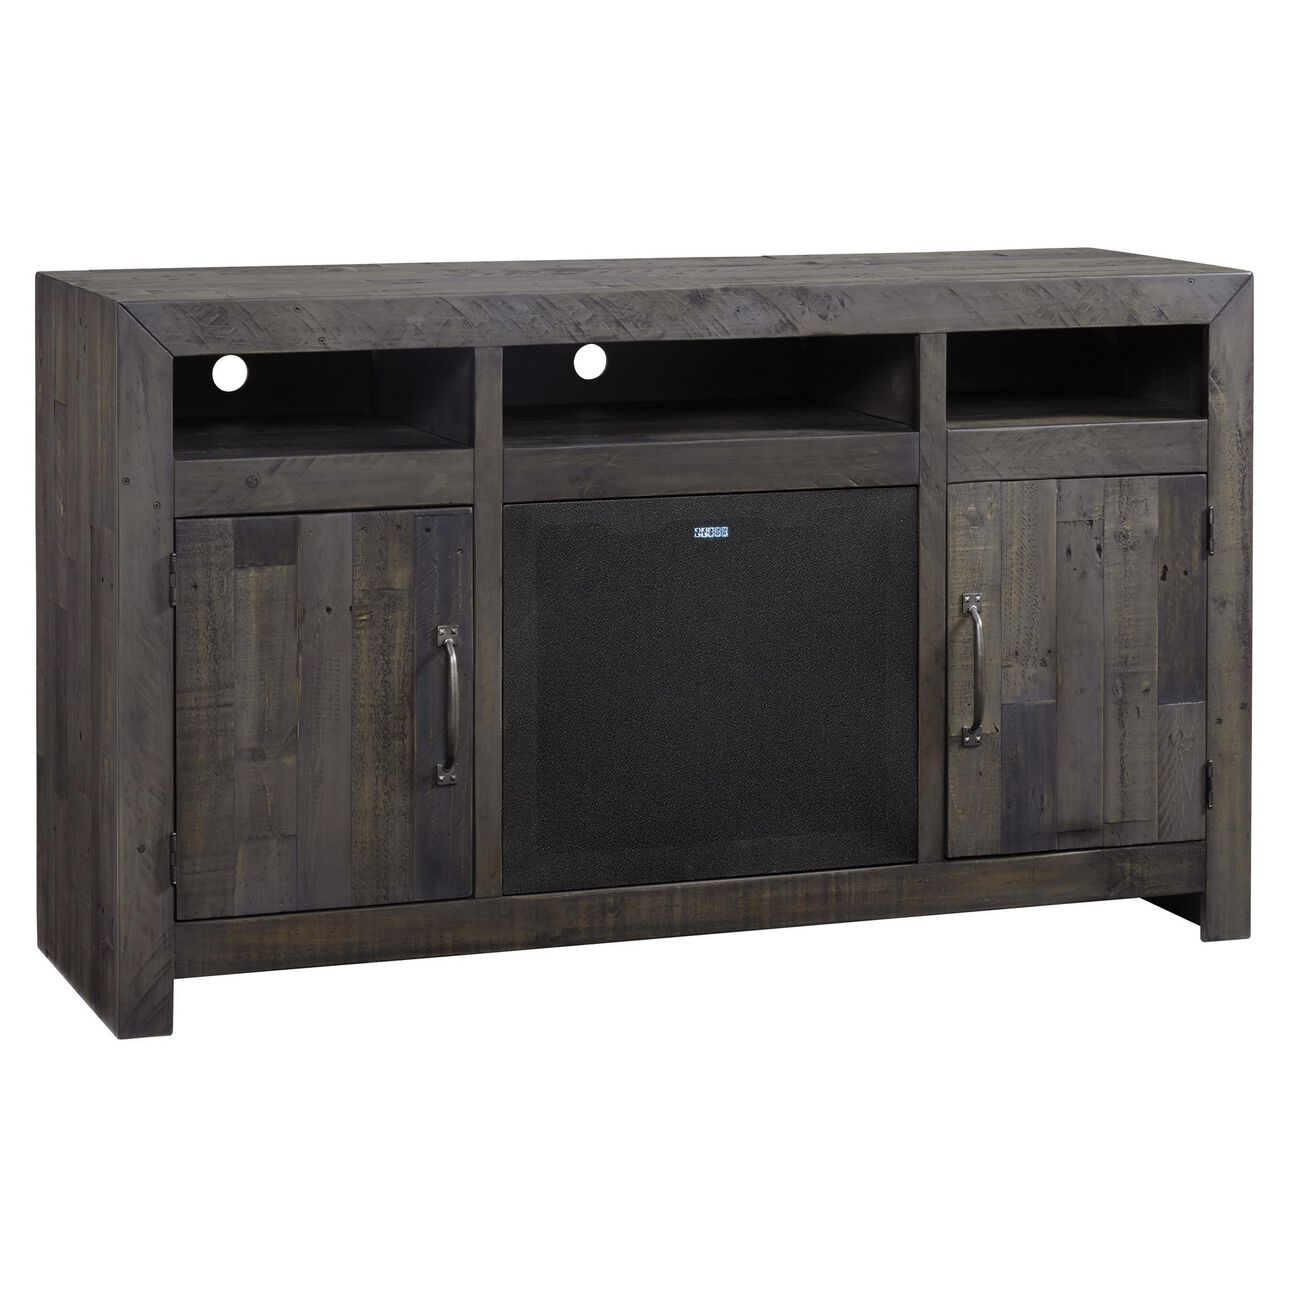 2 Cabinet Wooden TV Stand with 1 Adjustable Center Shelf, Large, Gray